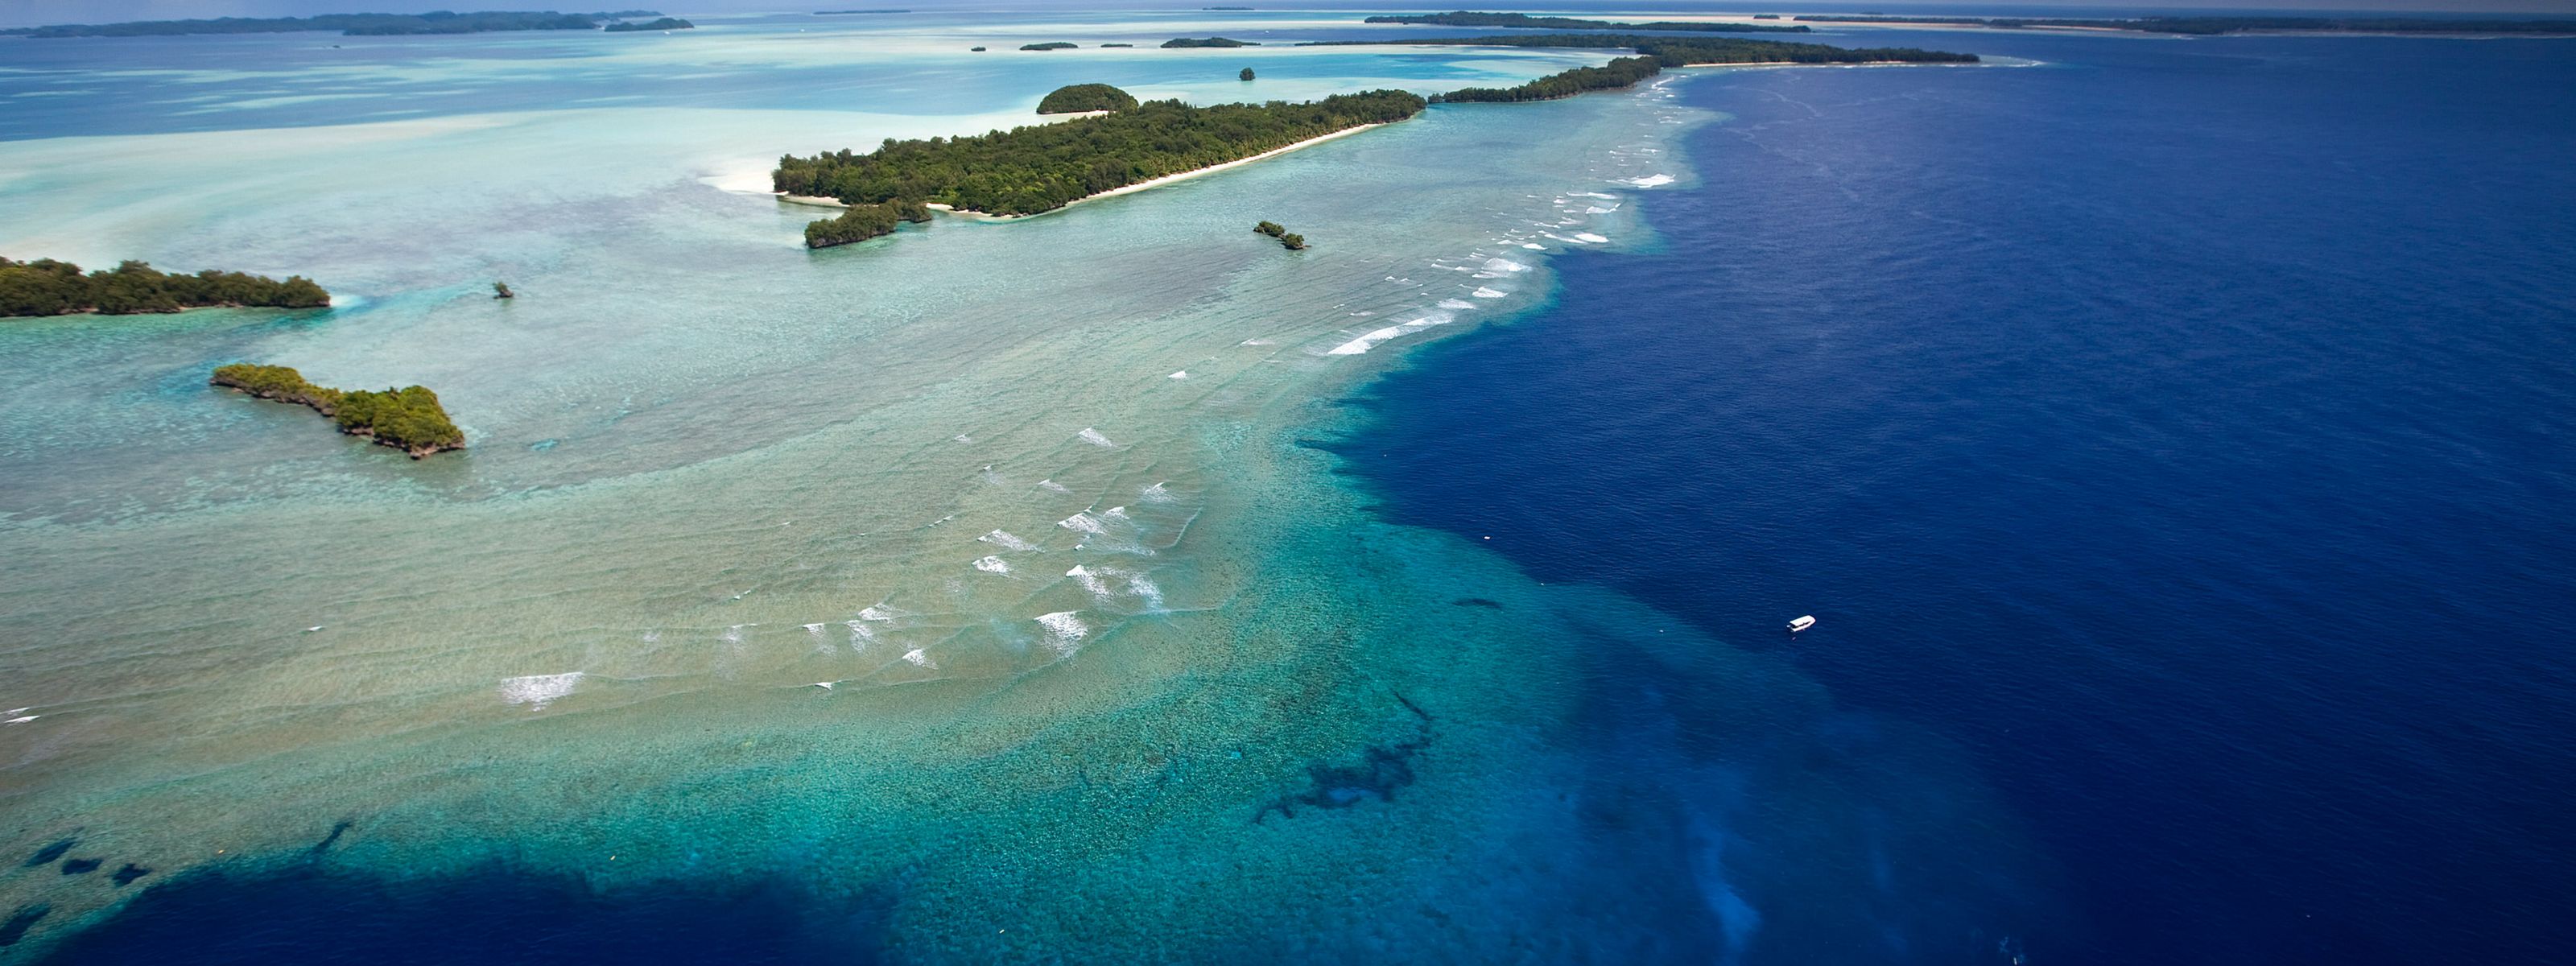 Aerial view of the sparkling blue waters of Palau, with a stretch of narrow islands.